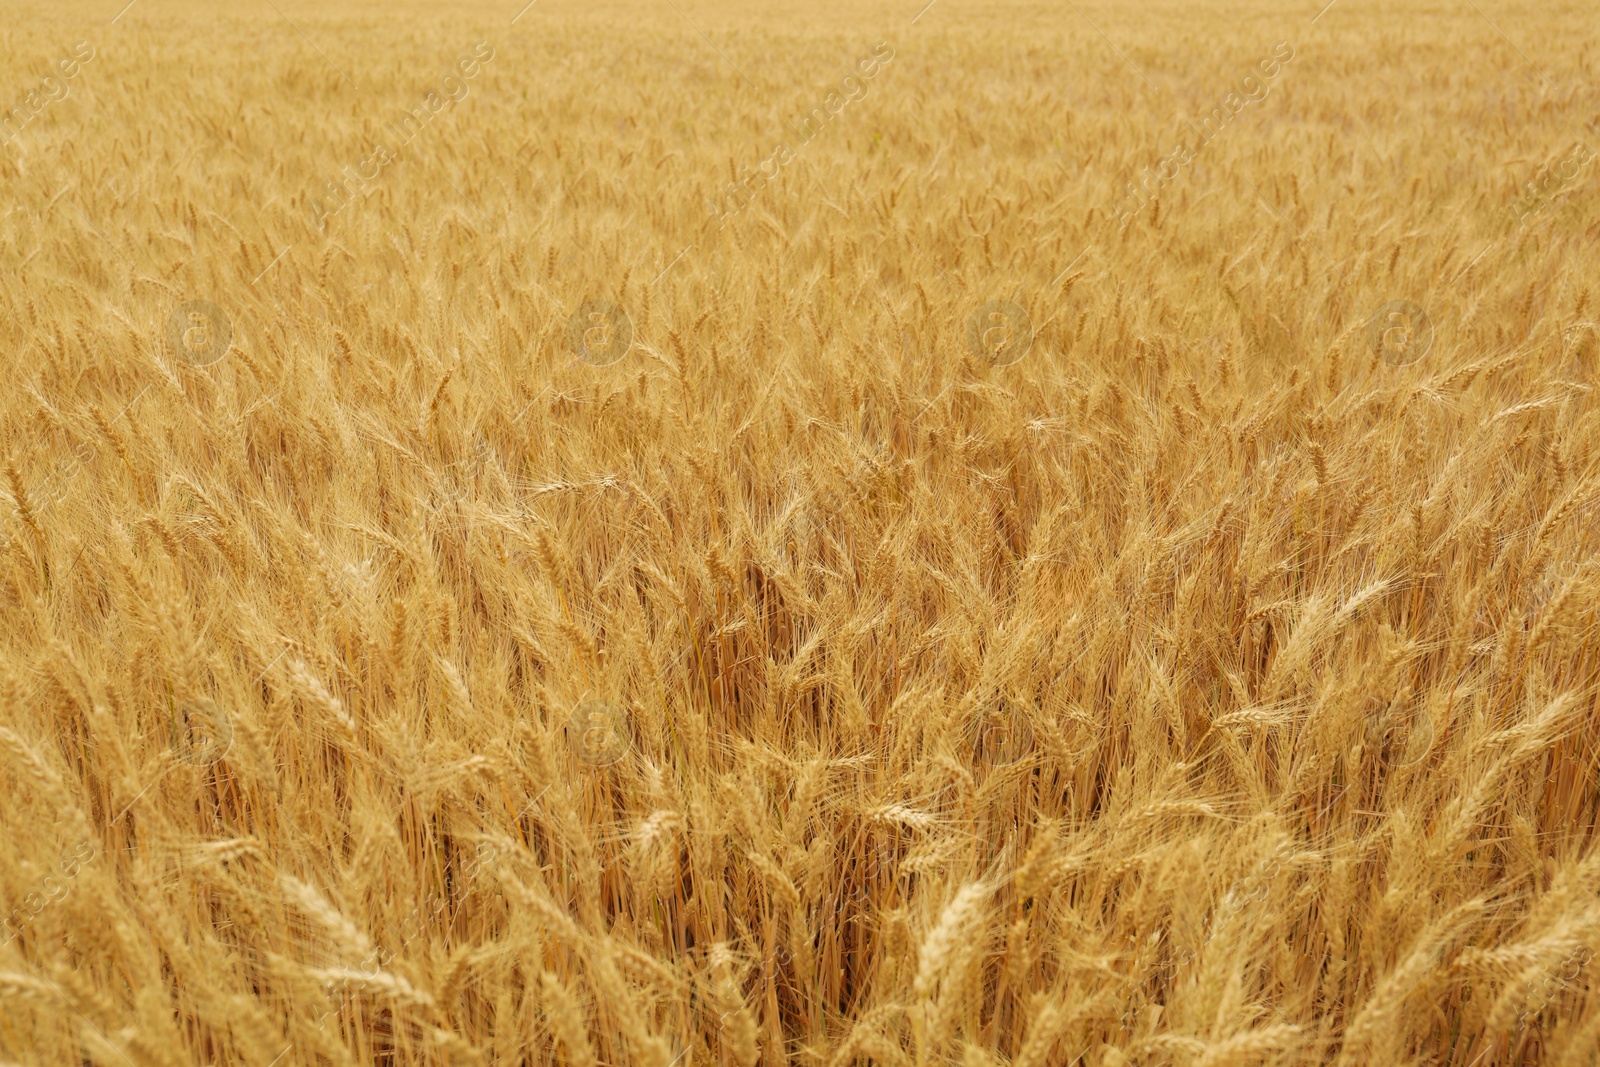 Photo of Beautiful agricultural field with ripe wheat crop